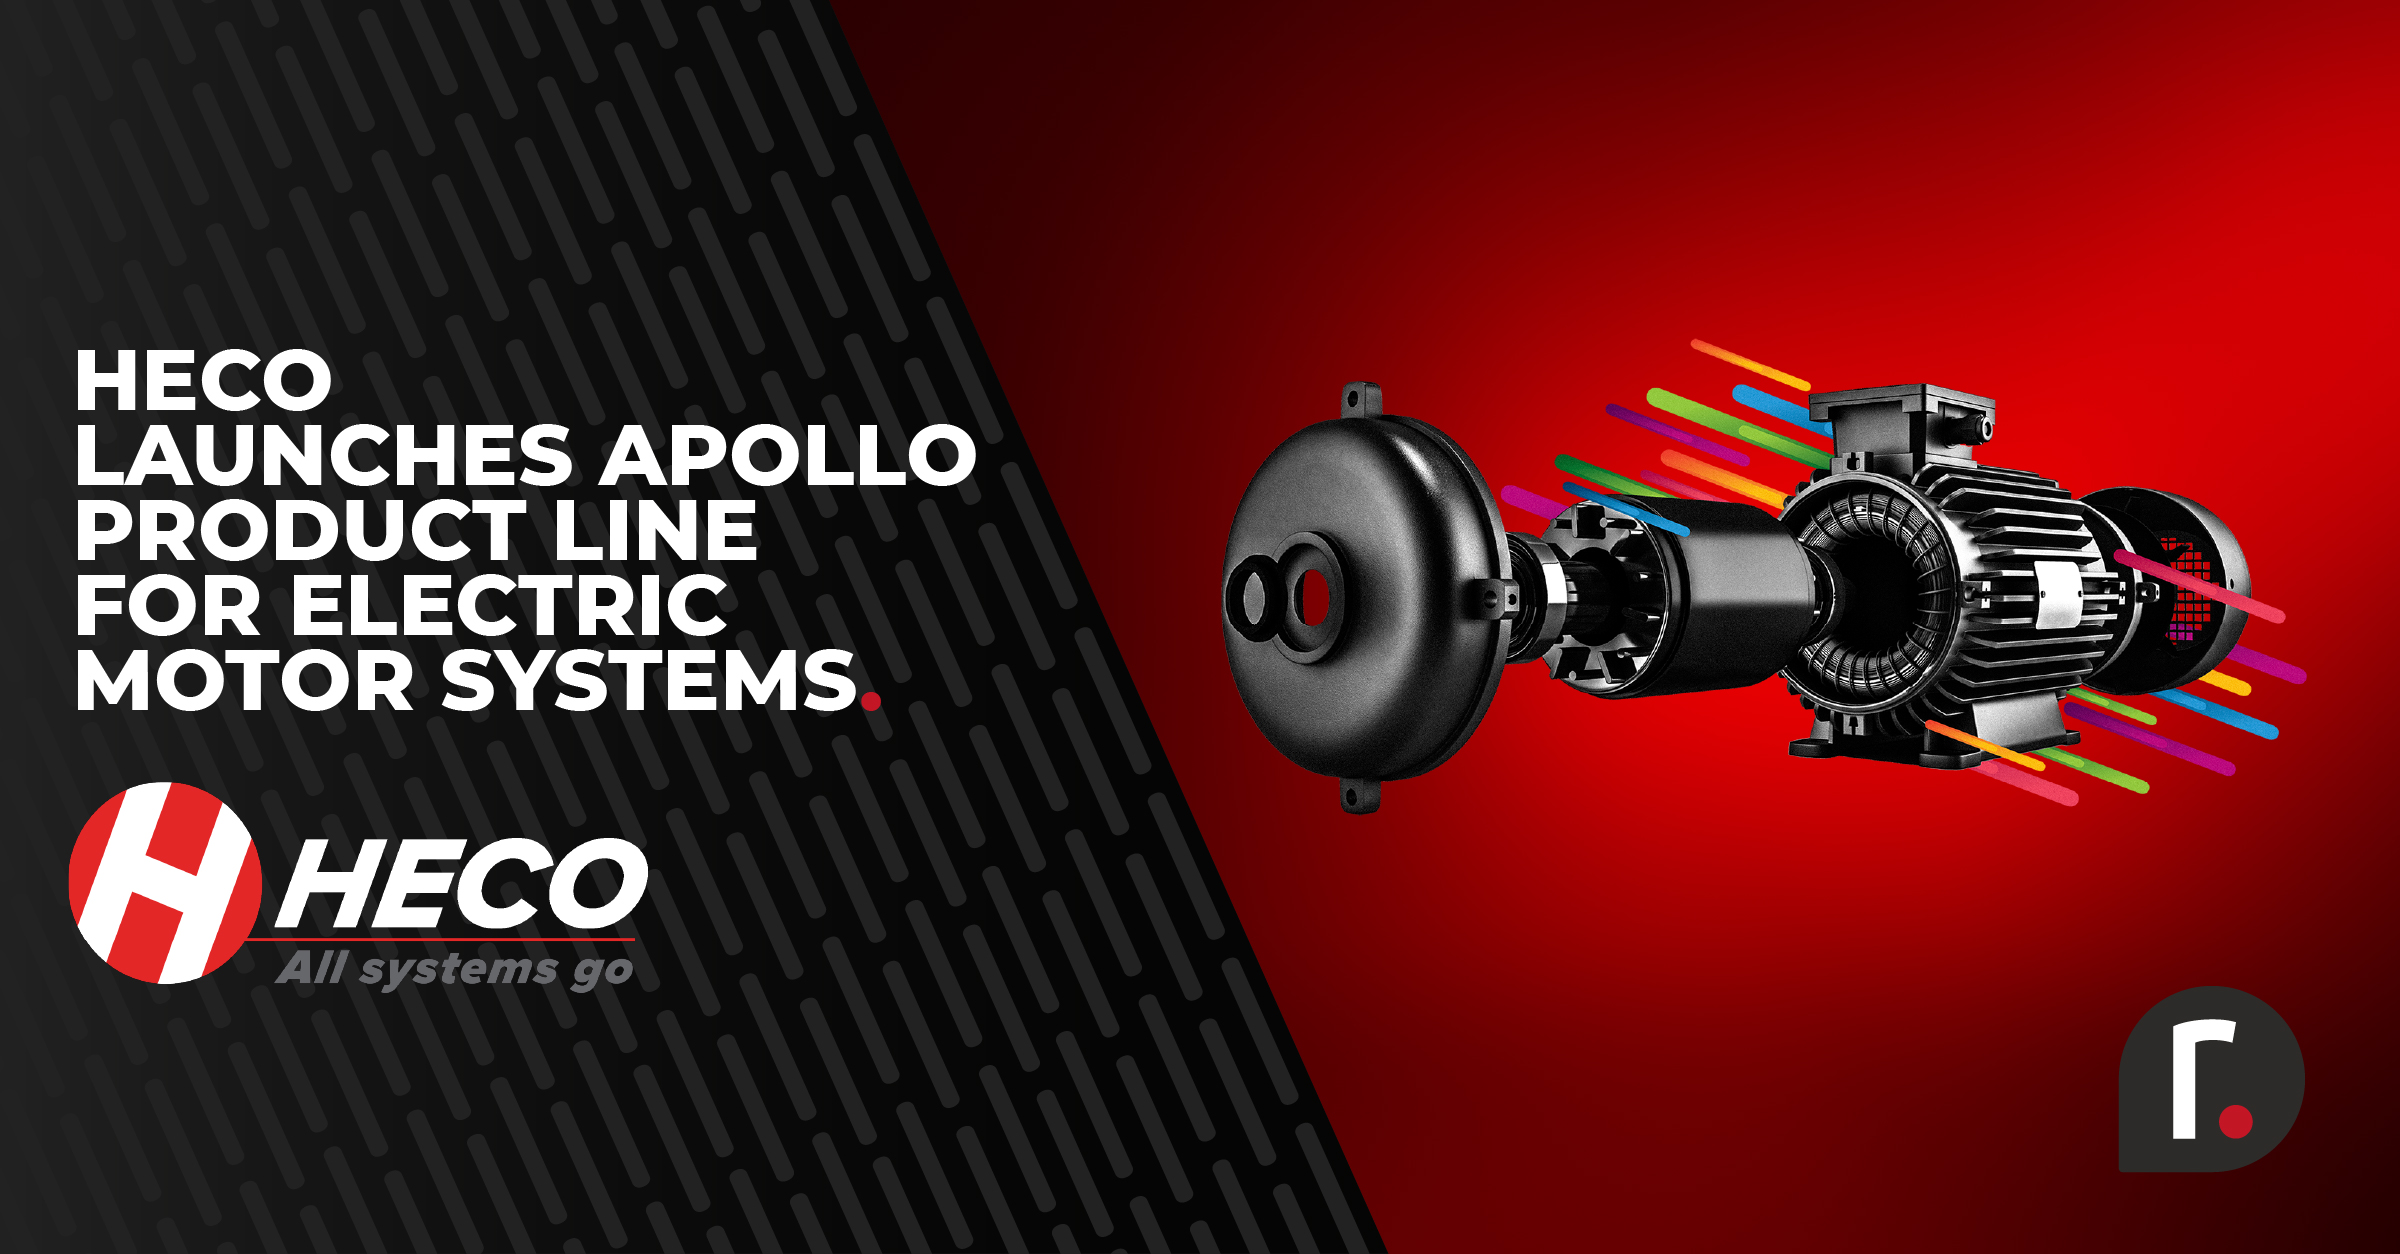 HECO launches Apollo Product Line for Electric Motor Systems